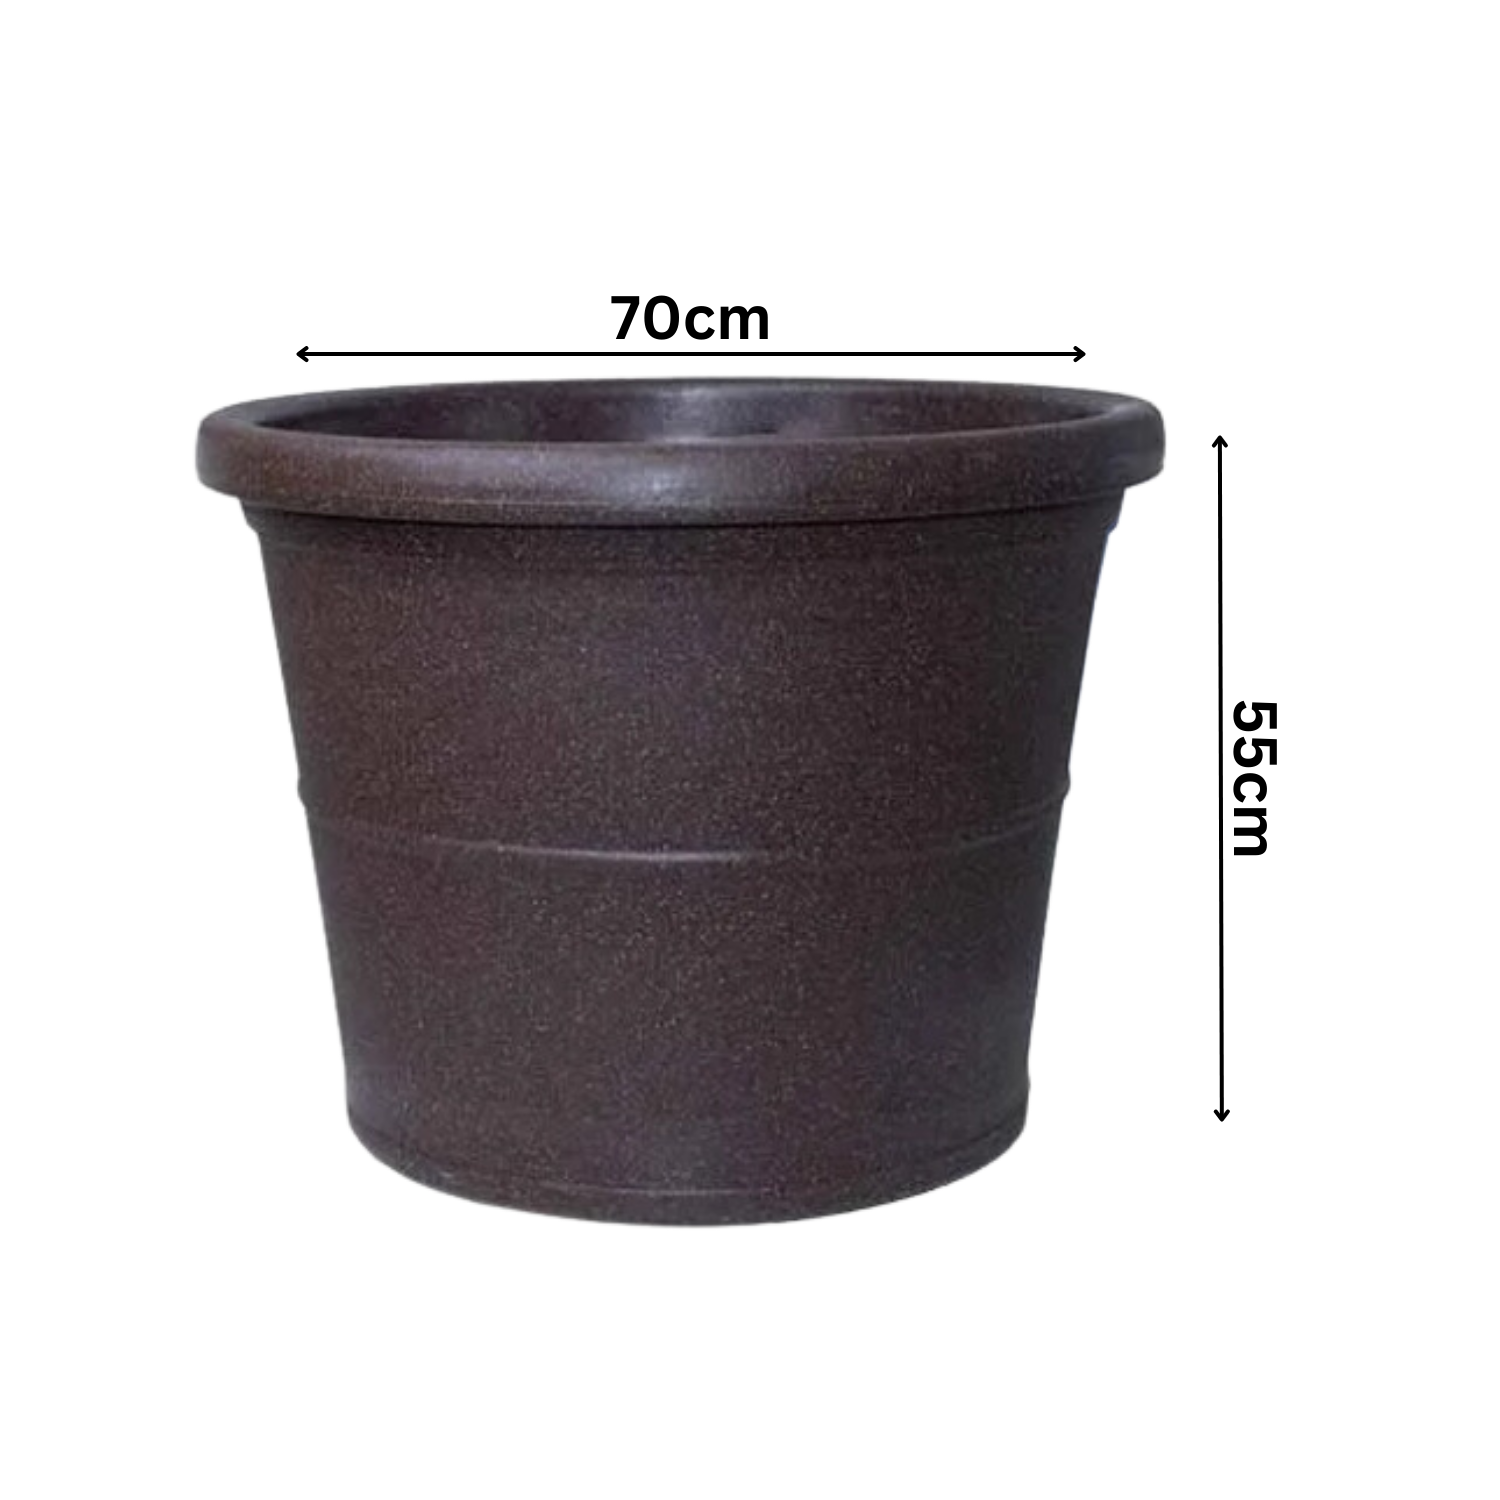 Duro Rotomolded Round Plastic Pot For Home & Garden (Brown Stone Finish, Pack Of 1)